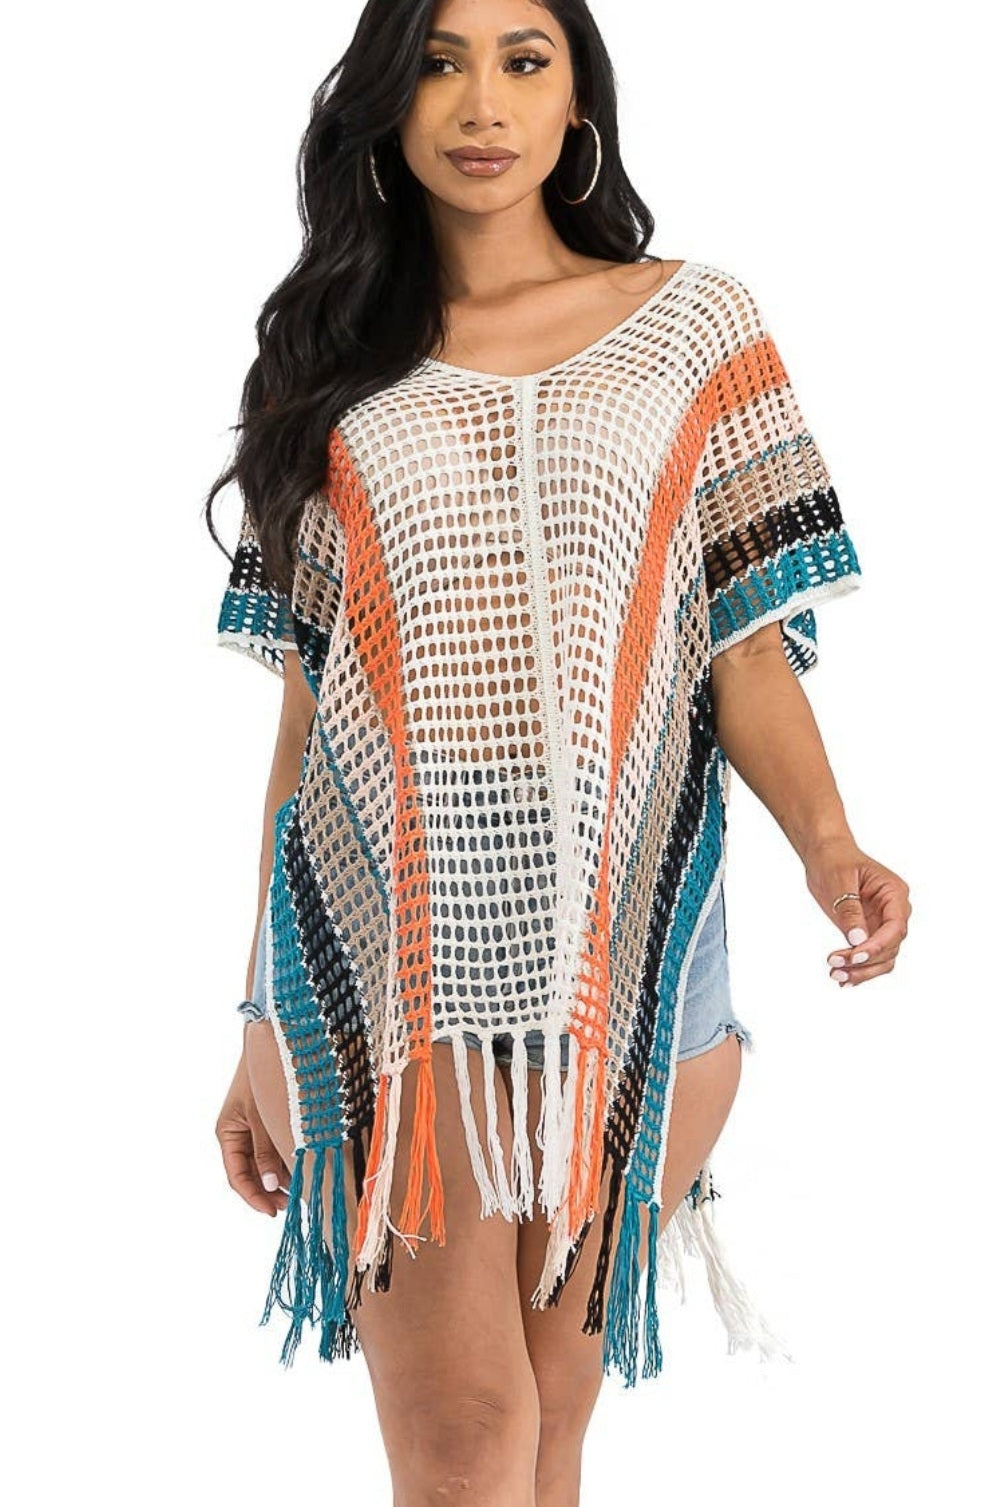 Cap Cana Crochet Knit Cover-Up